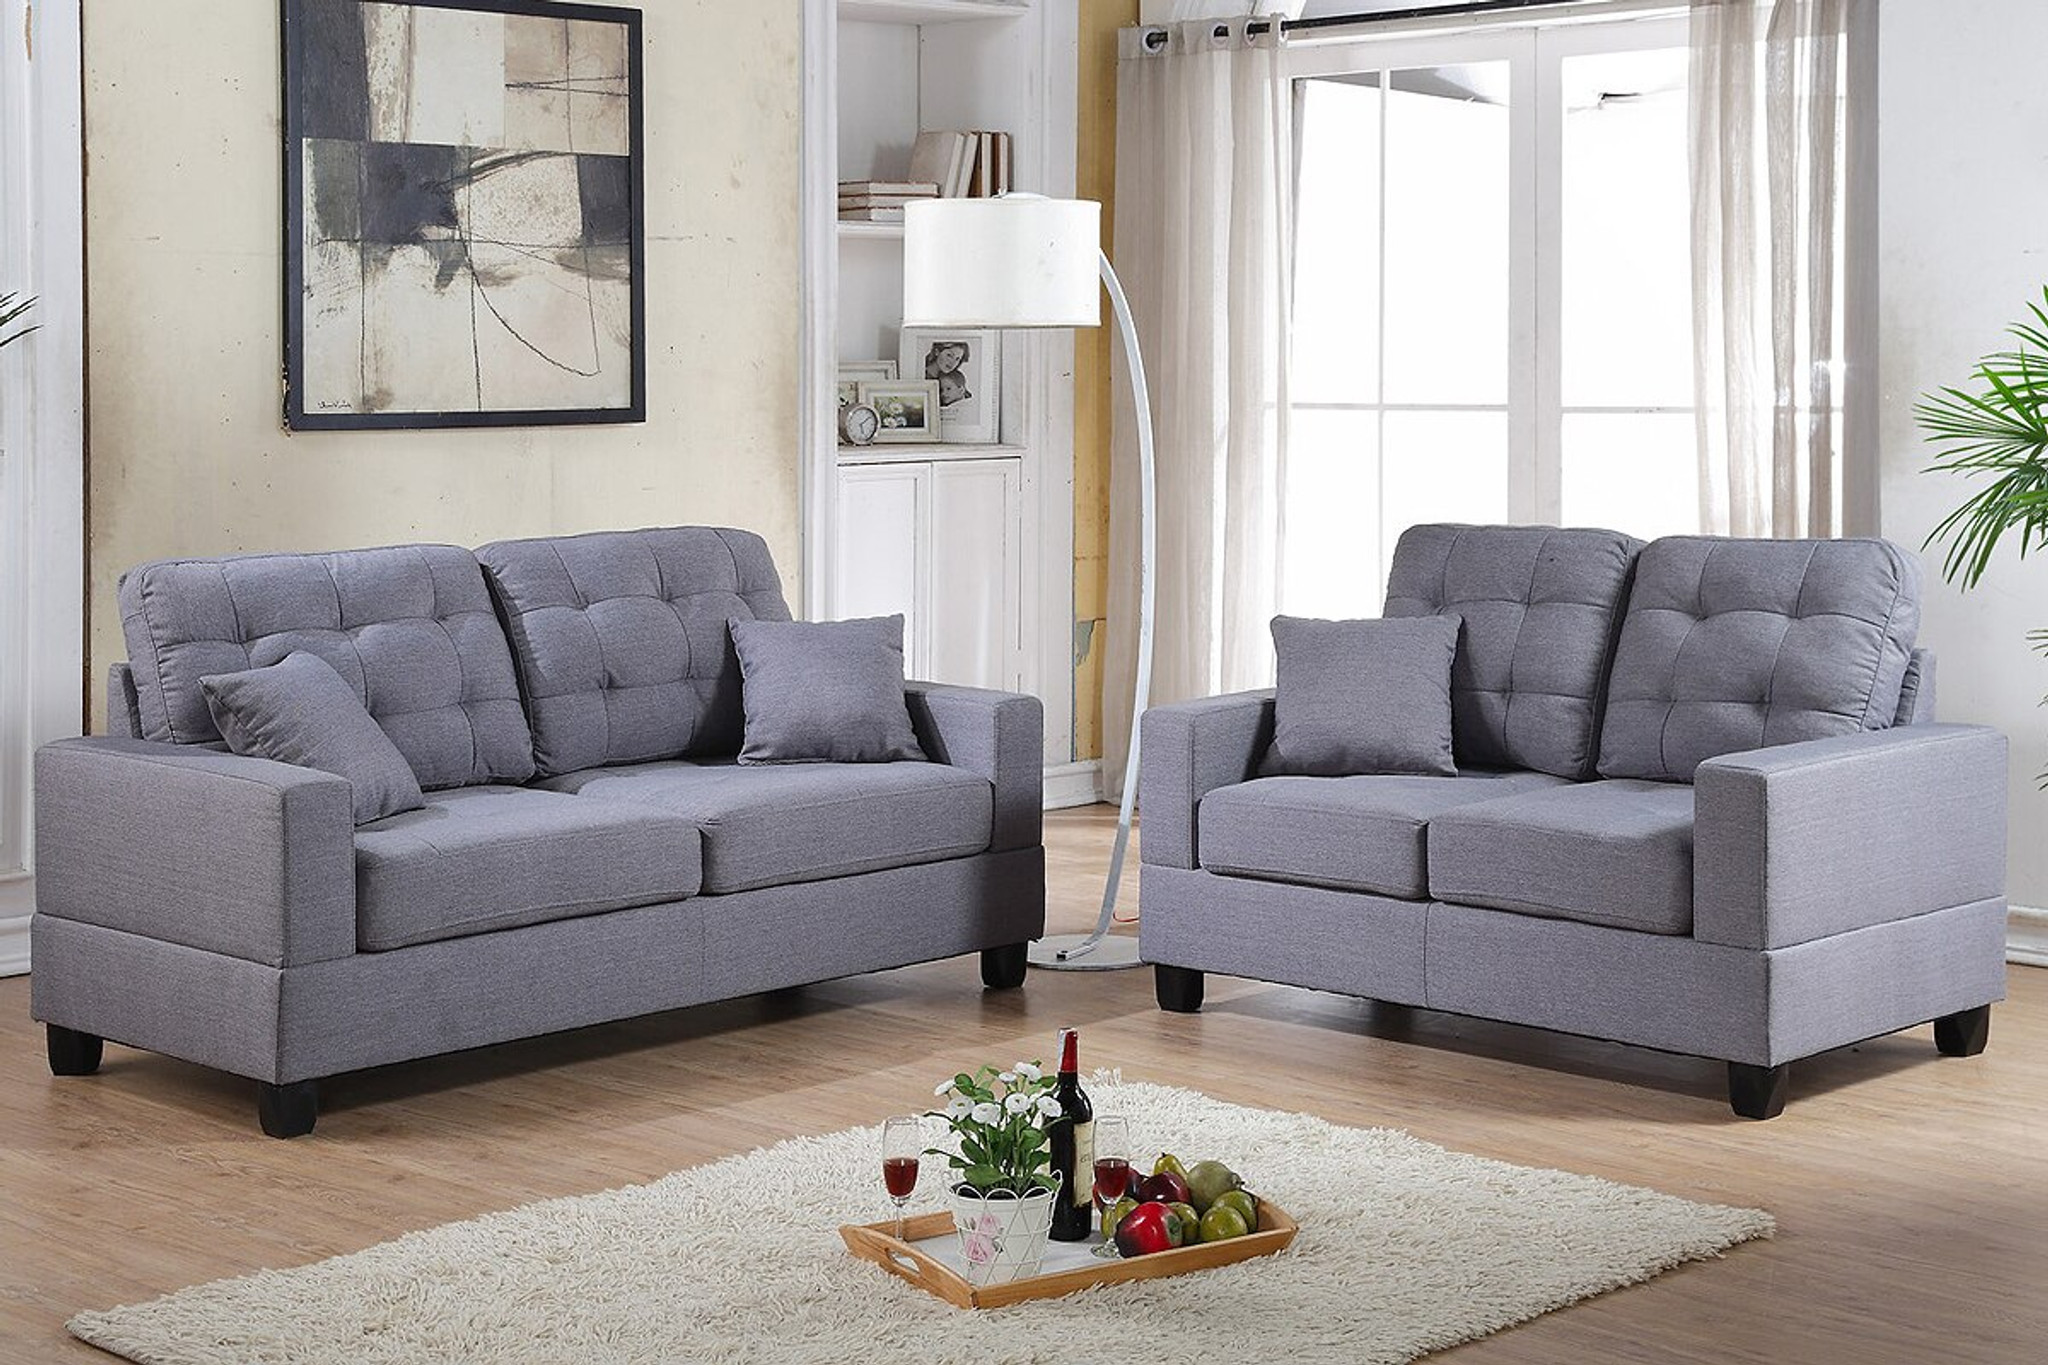 KASSA MALL HOME FURNITURE - F7858 - 2PCS Sofa Set in Grey Linen with Four  Accent Pillows